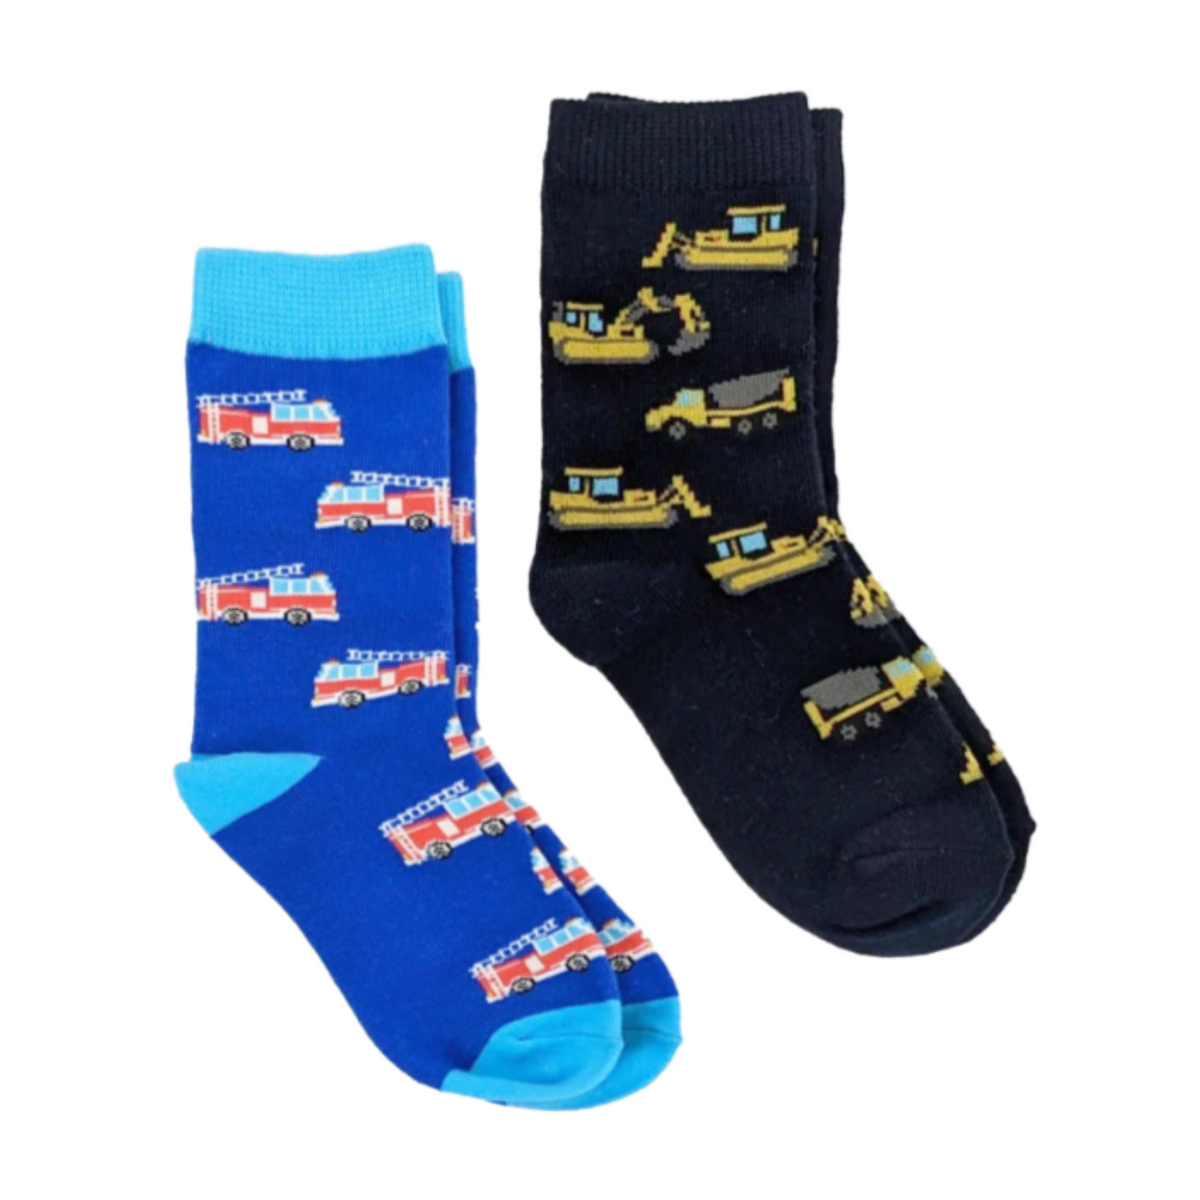 Sock Harbor Trucks 2-pack kids&#39; crew socks featuring blue sock with red fire trucks and black sock with yellow construction trucks. Socks shown on display laying flat. 